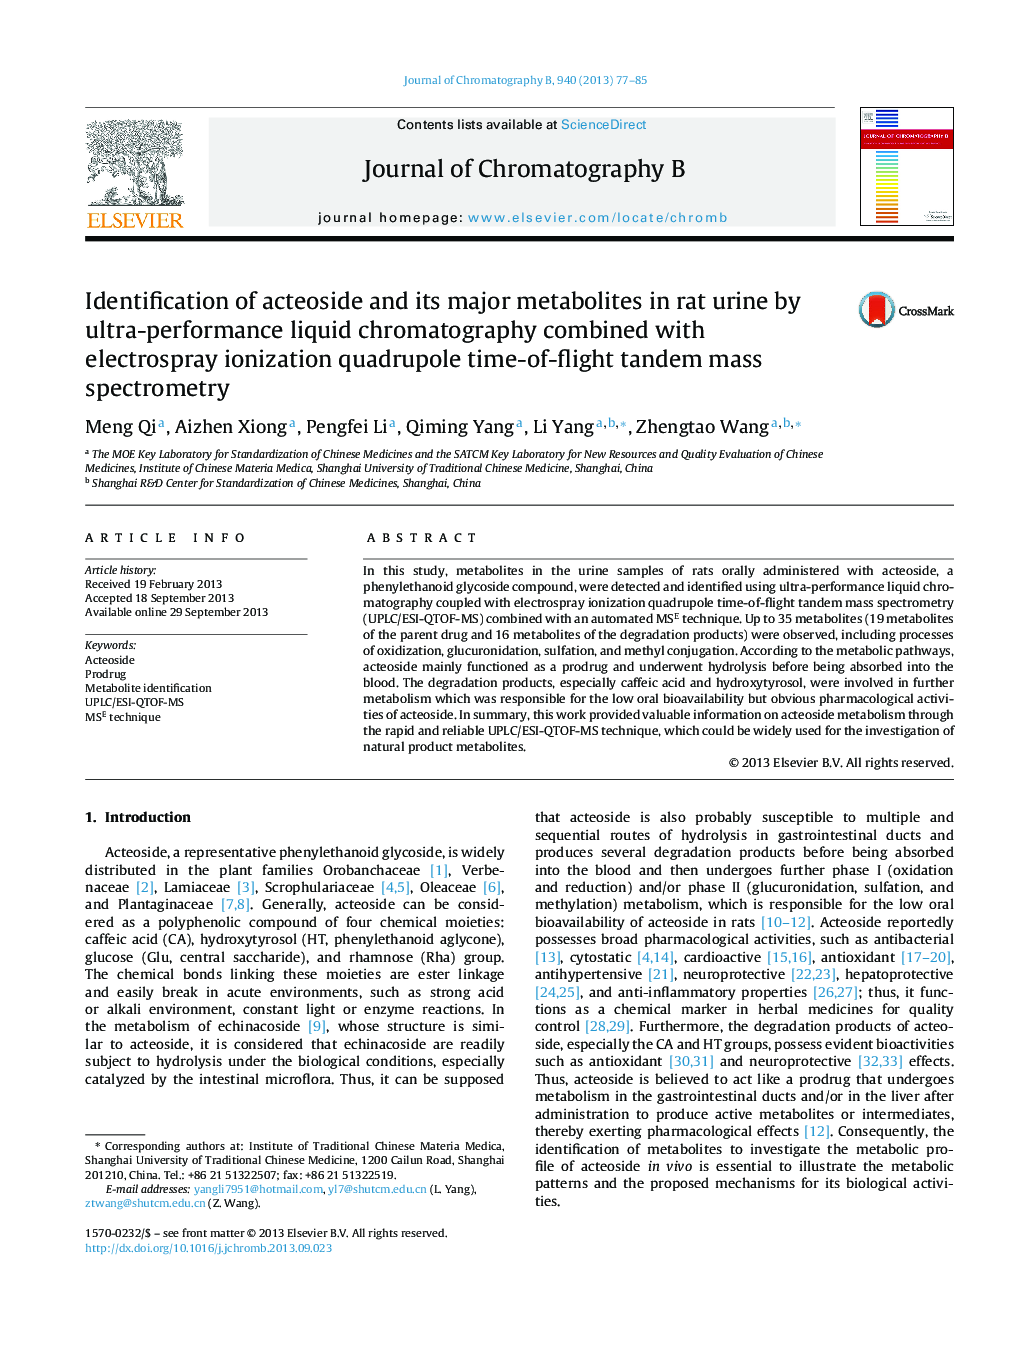 Identification of acteoside and its major metabolites in rat urine by ultra-performance liquid chromatography combined with electrospray ionization quadrupole time-of-flight tandem mass spectrometry